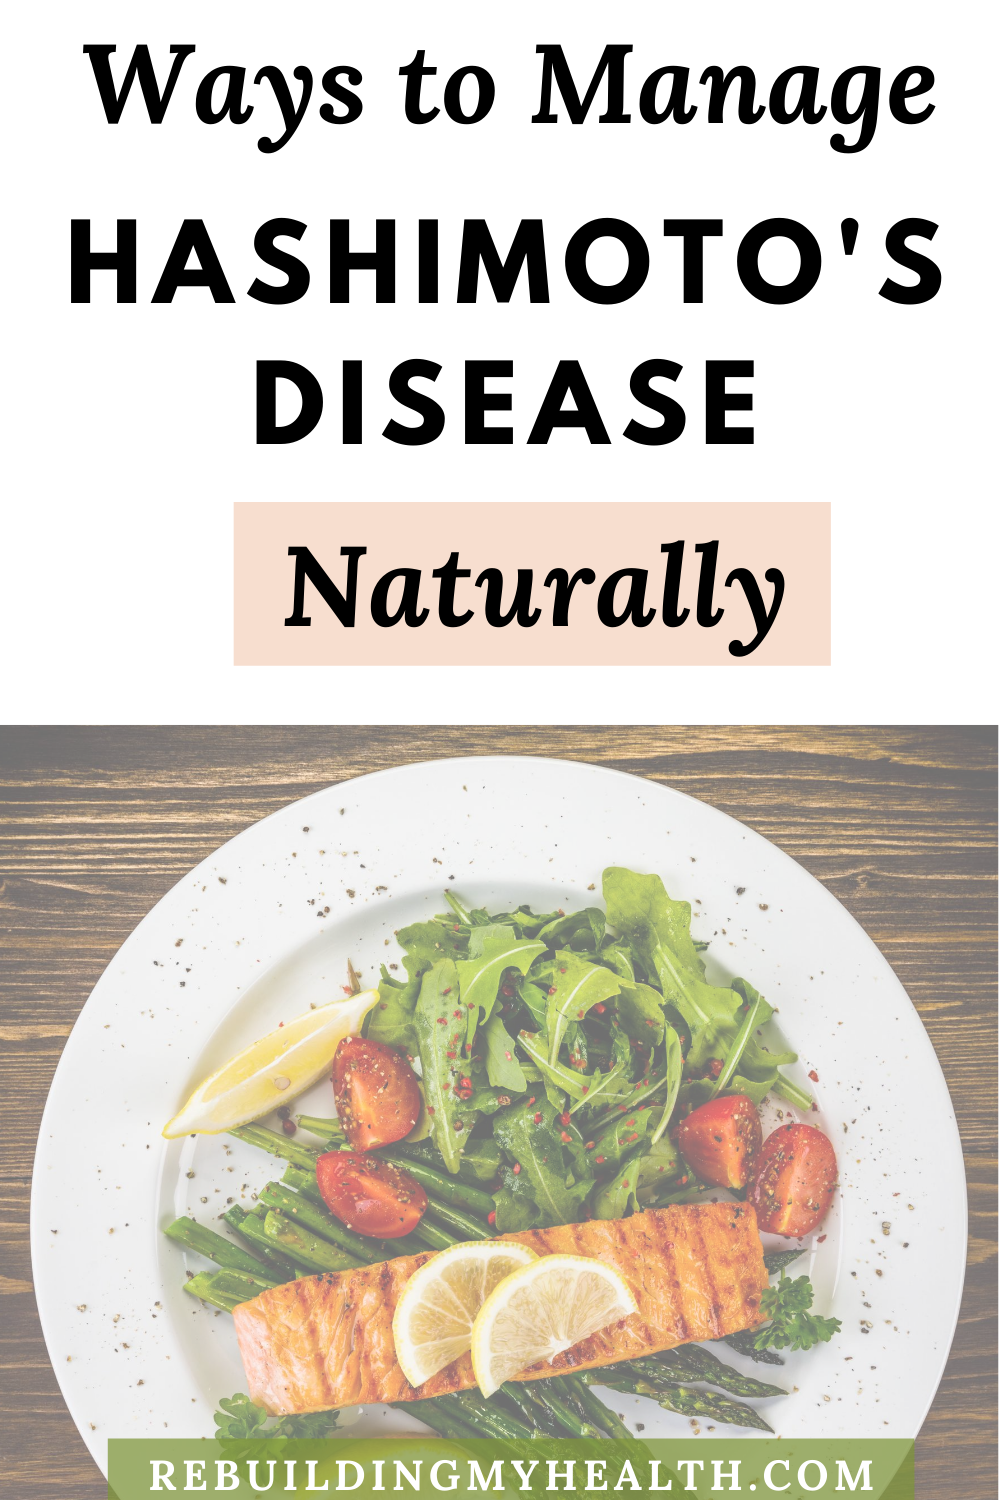 Learn how one woman turned to diet, exercise and other practices to manage Hashimoto's disease